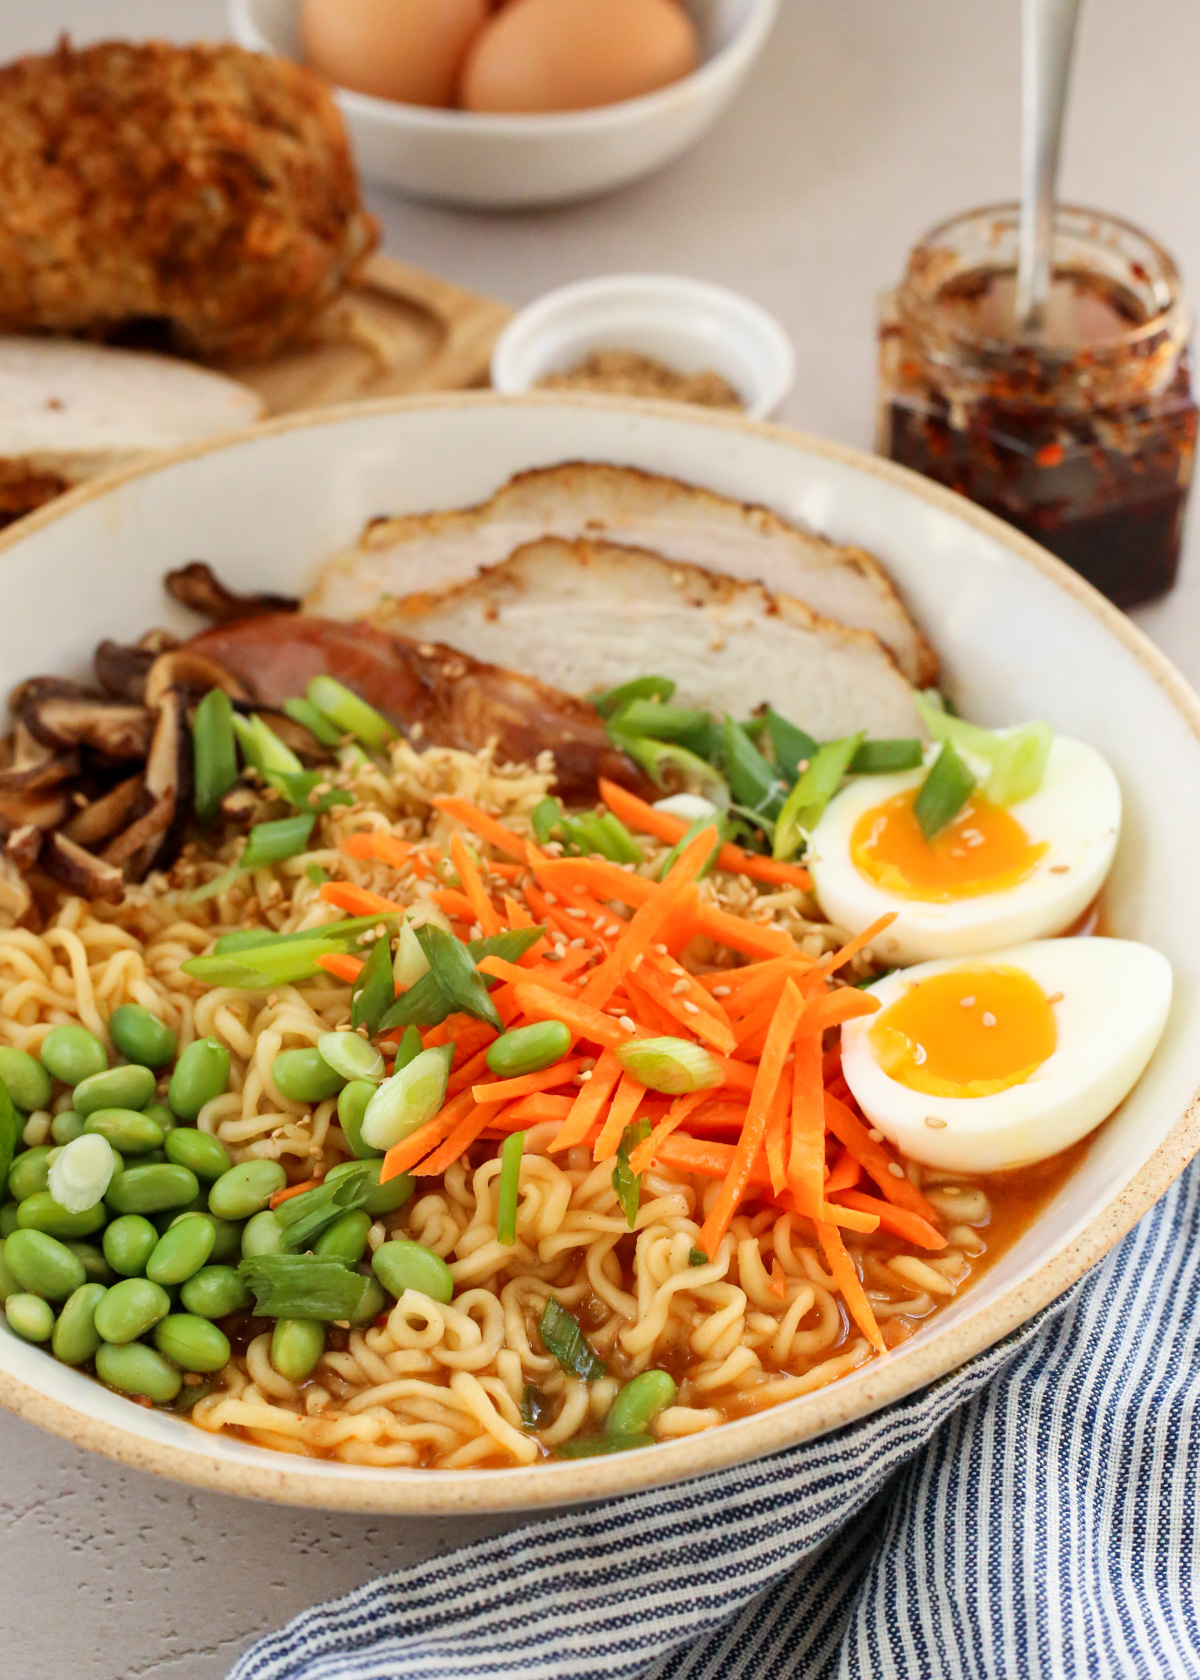 A full bowl of leftover turkey ramen displayed in a kitchen scene, with the colorful veggies standing out against the noodles, broth, and sliced turkey with soft boiled 7 minute eggs sliced and placed inside the bowl on the right side